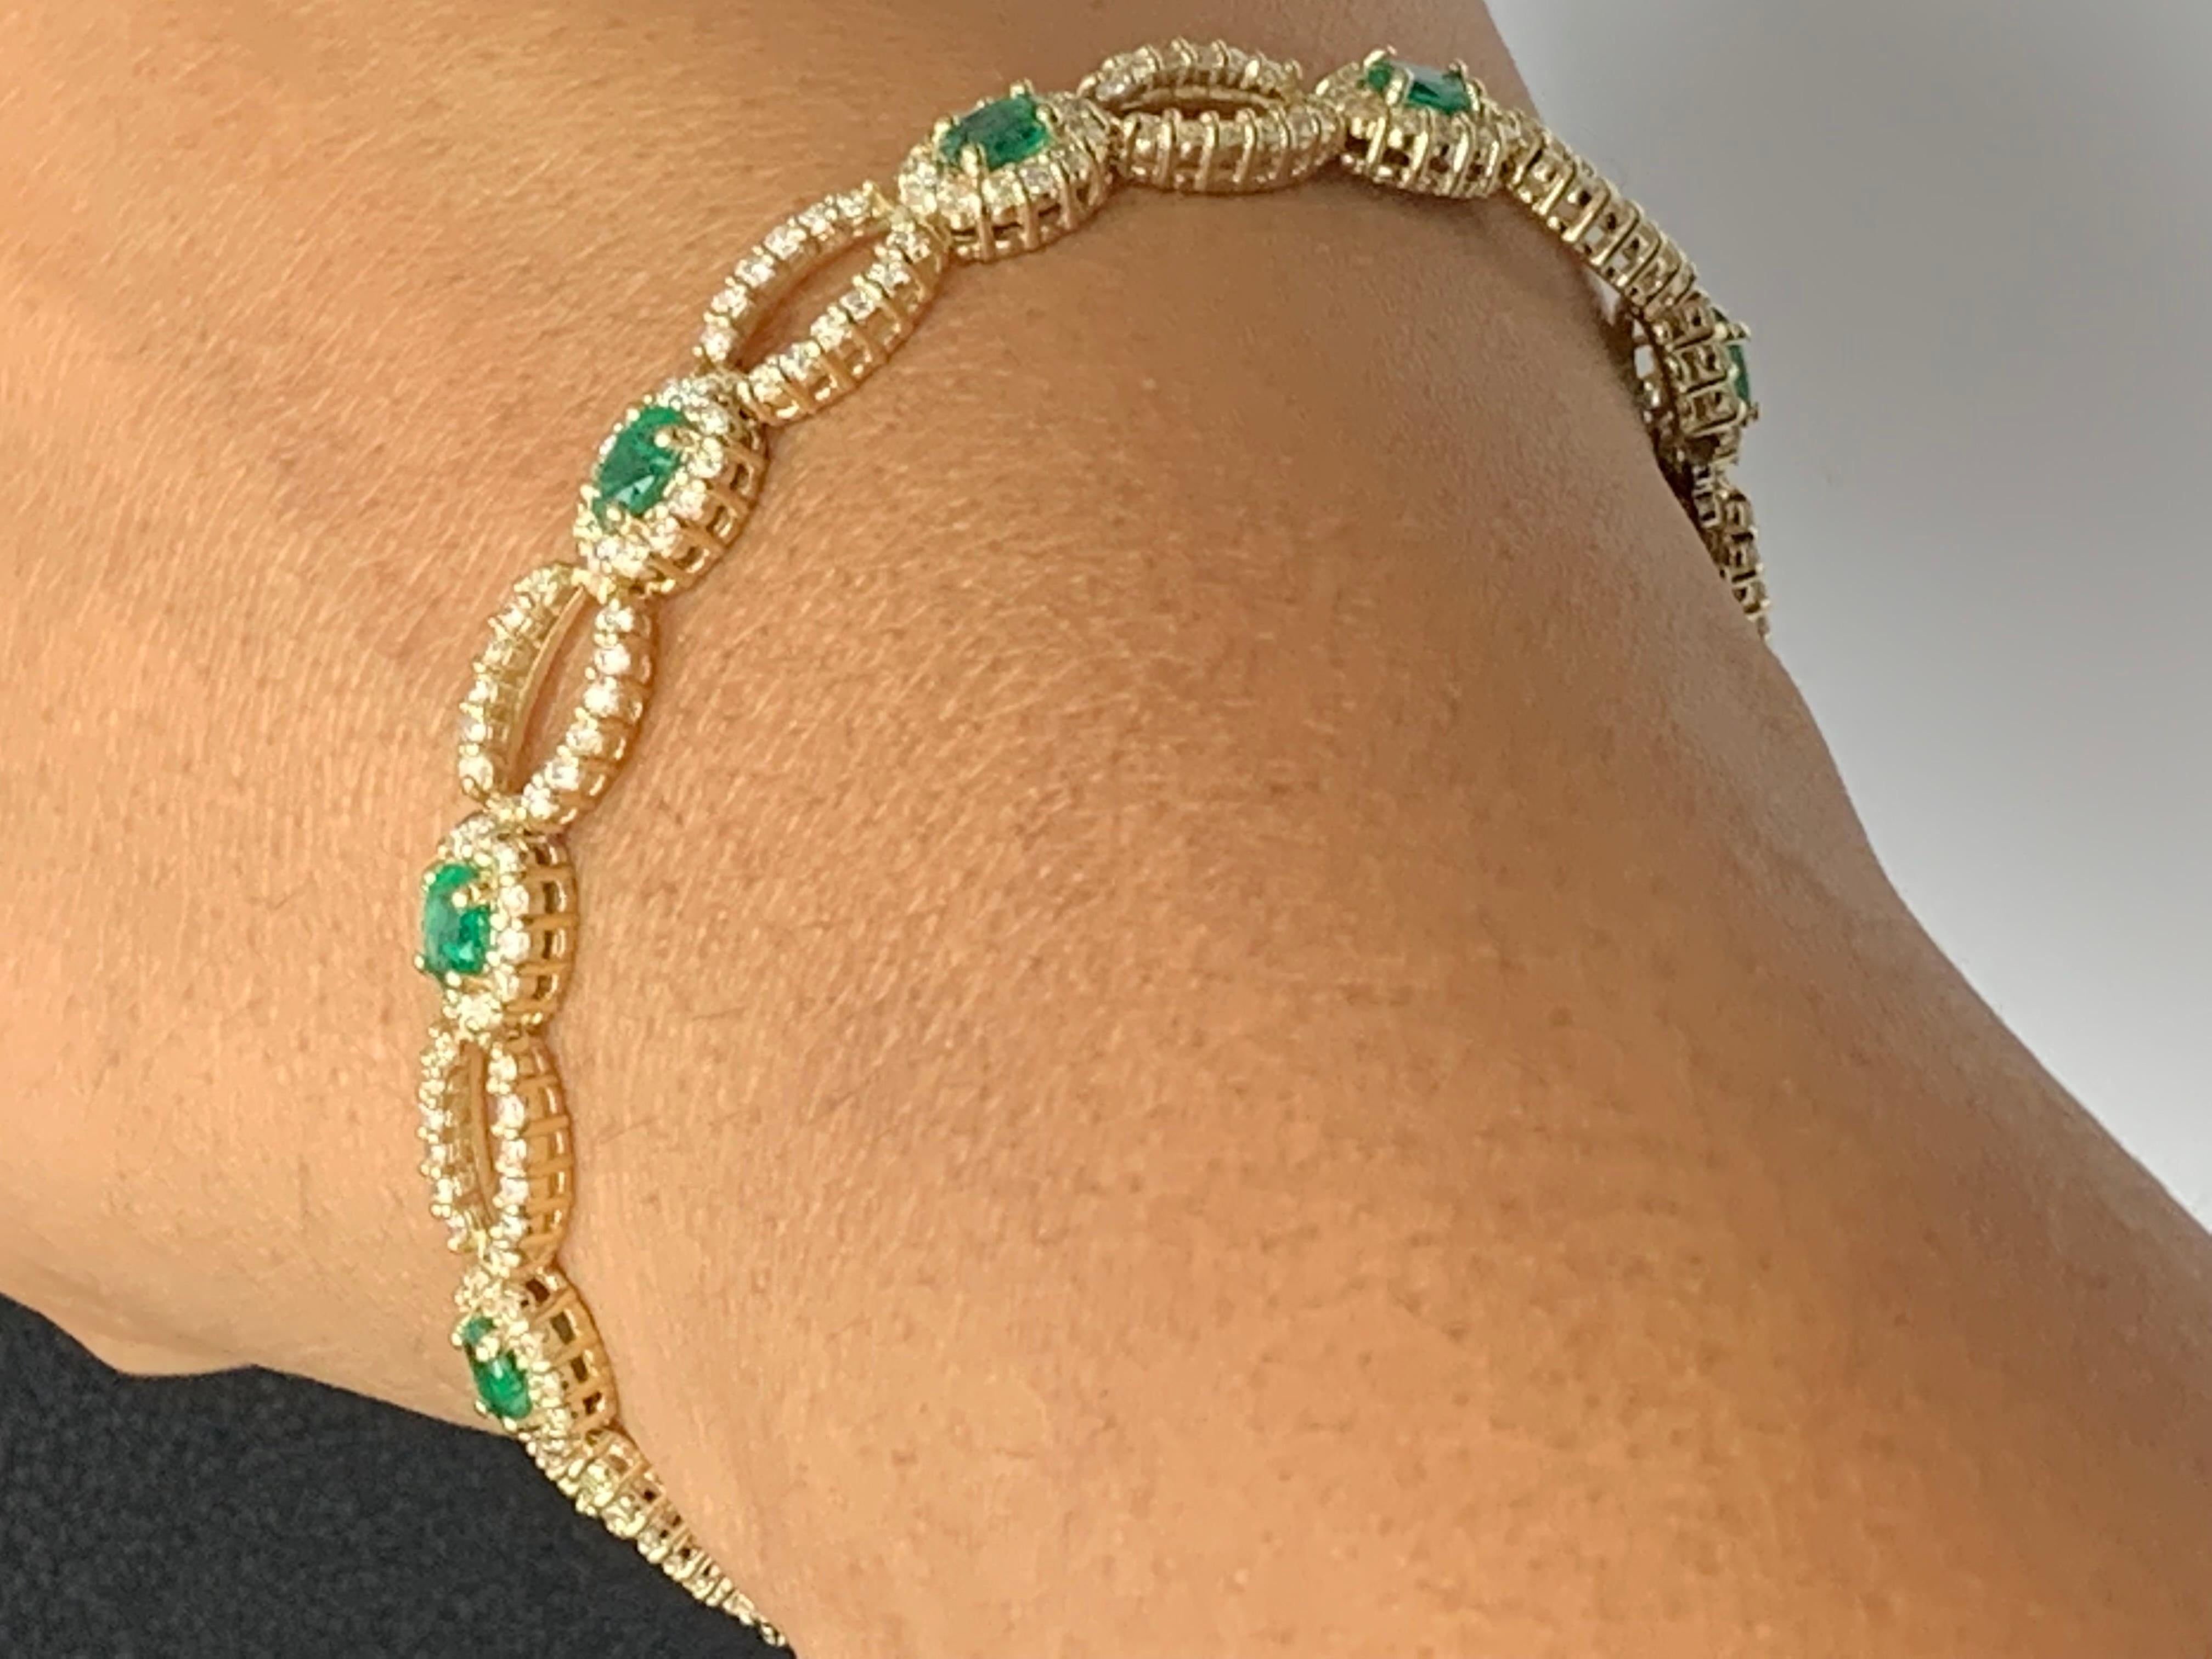 Open-Work 2.13 Carat Emerald and Diamond Bracelet in 14K Yellow Gold For Sale 10